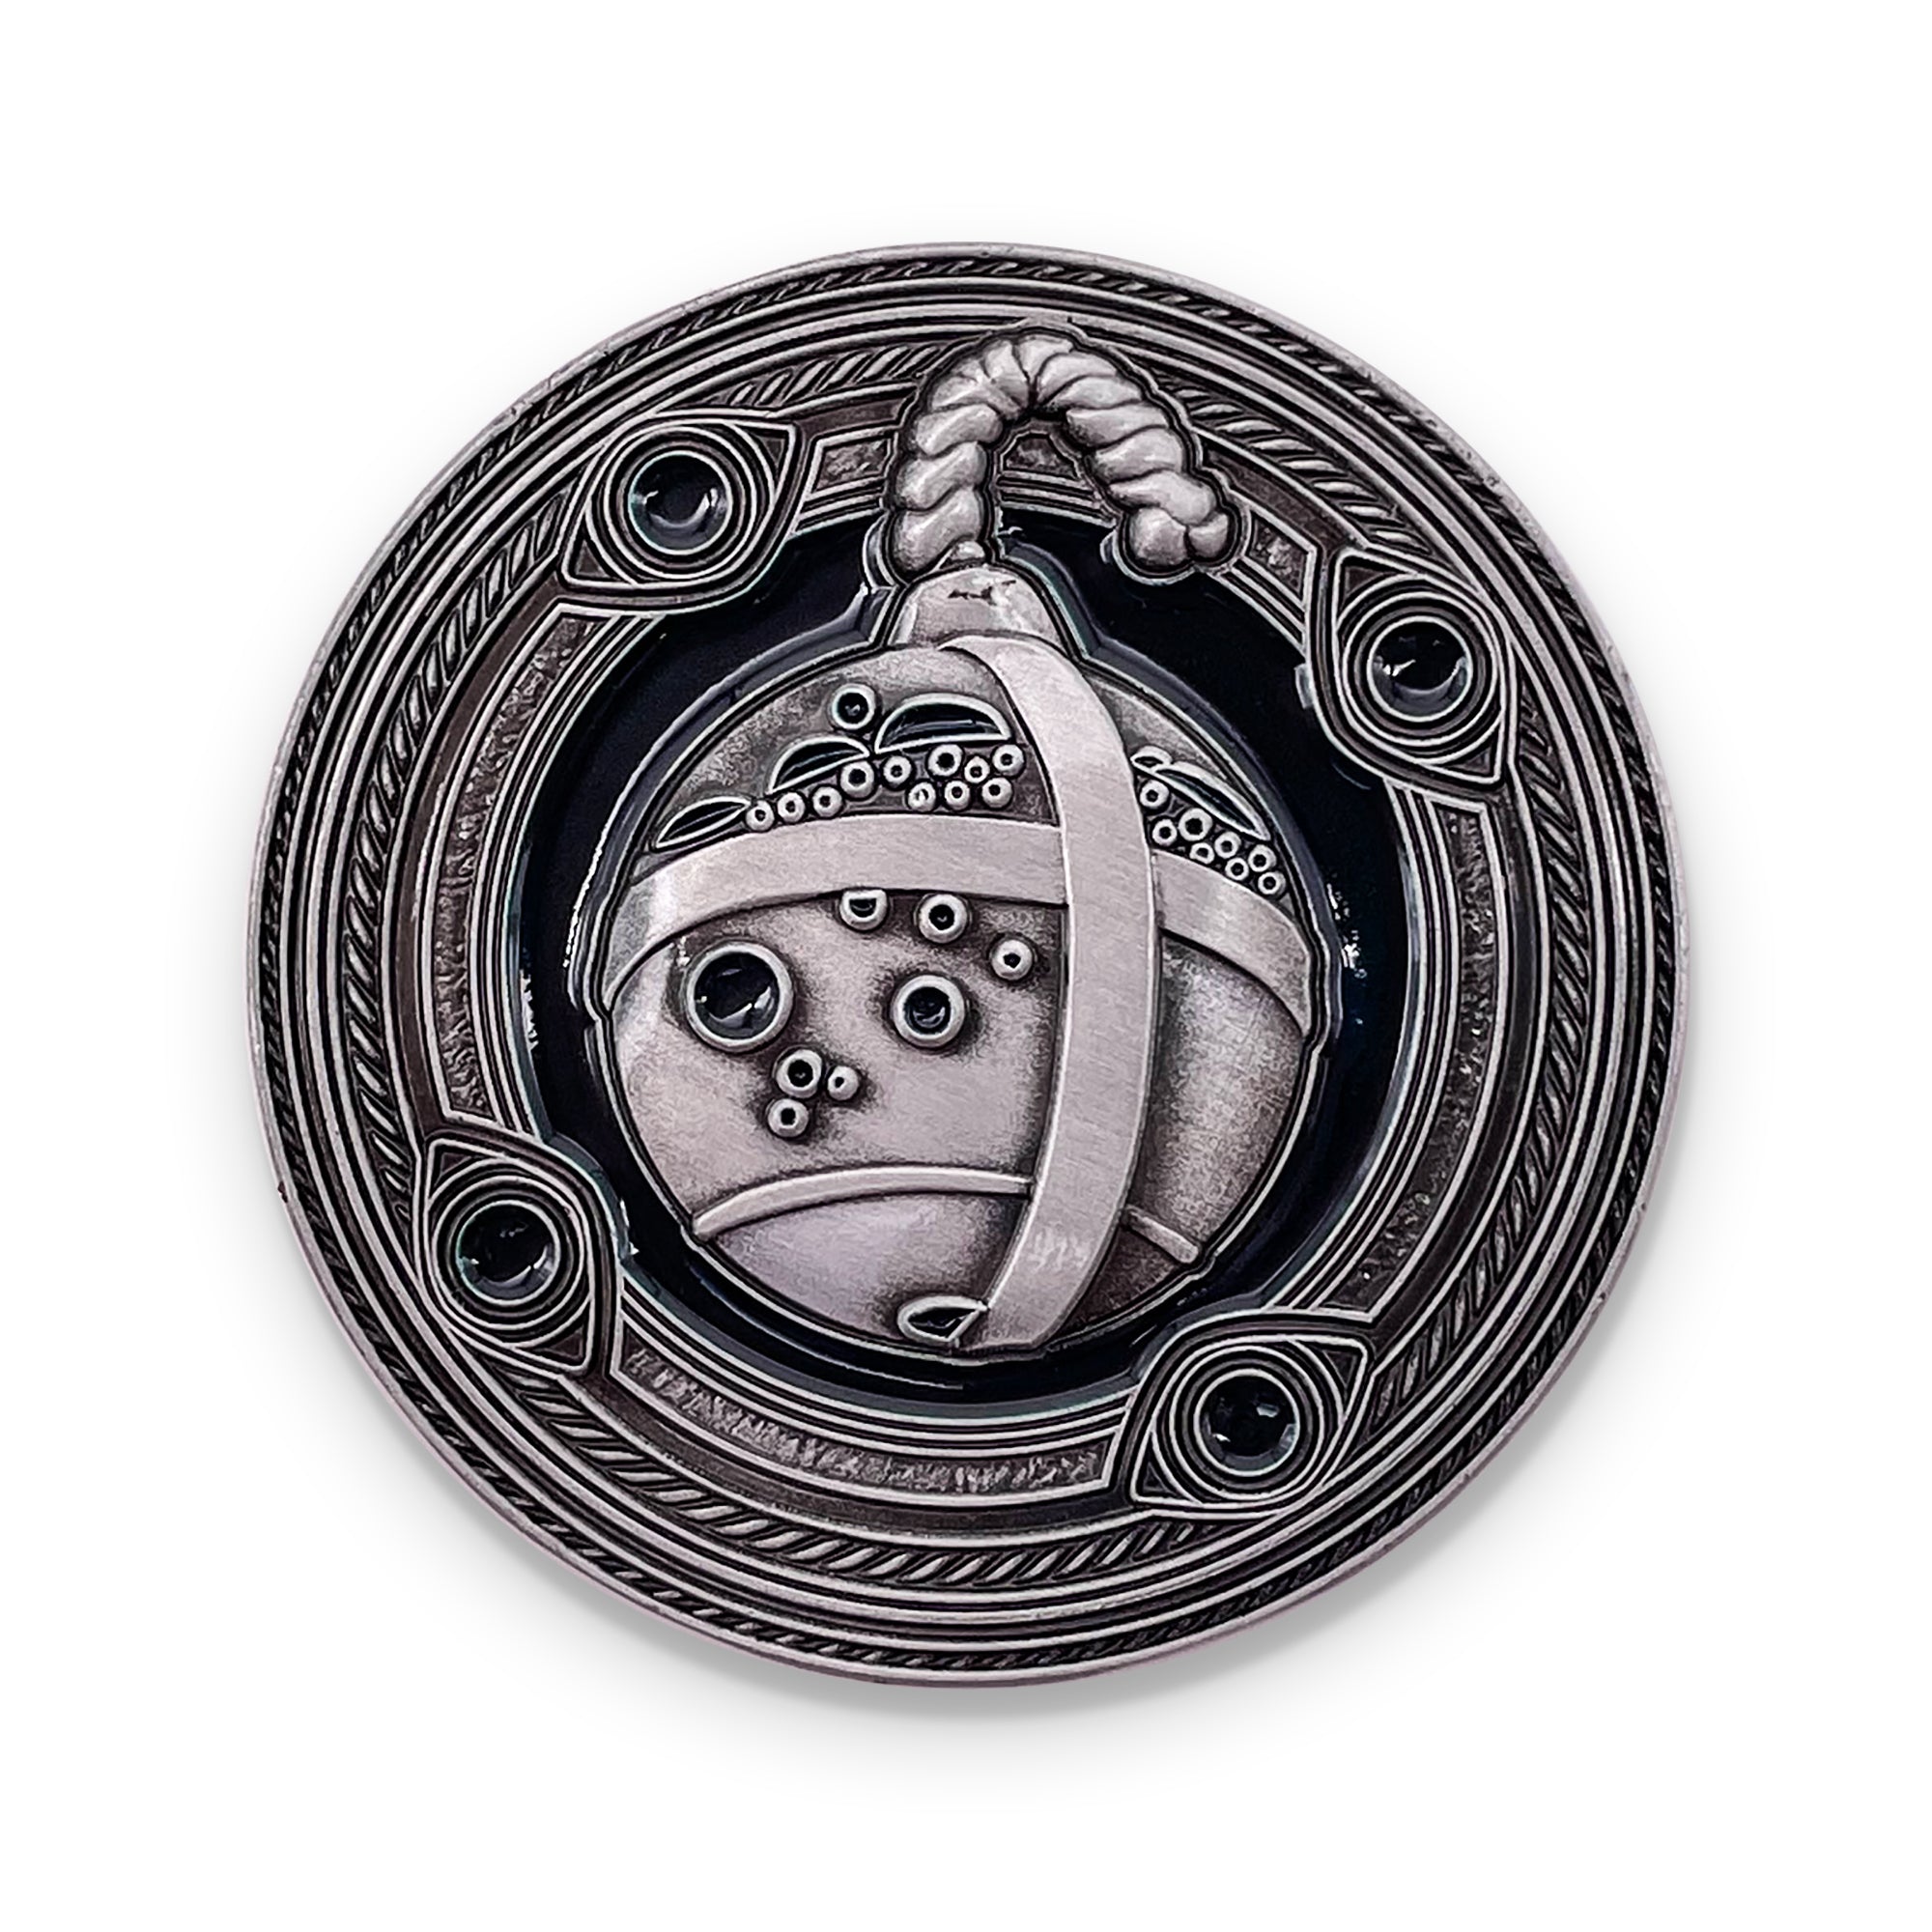 Inventor - Single 45mm Profession Coin